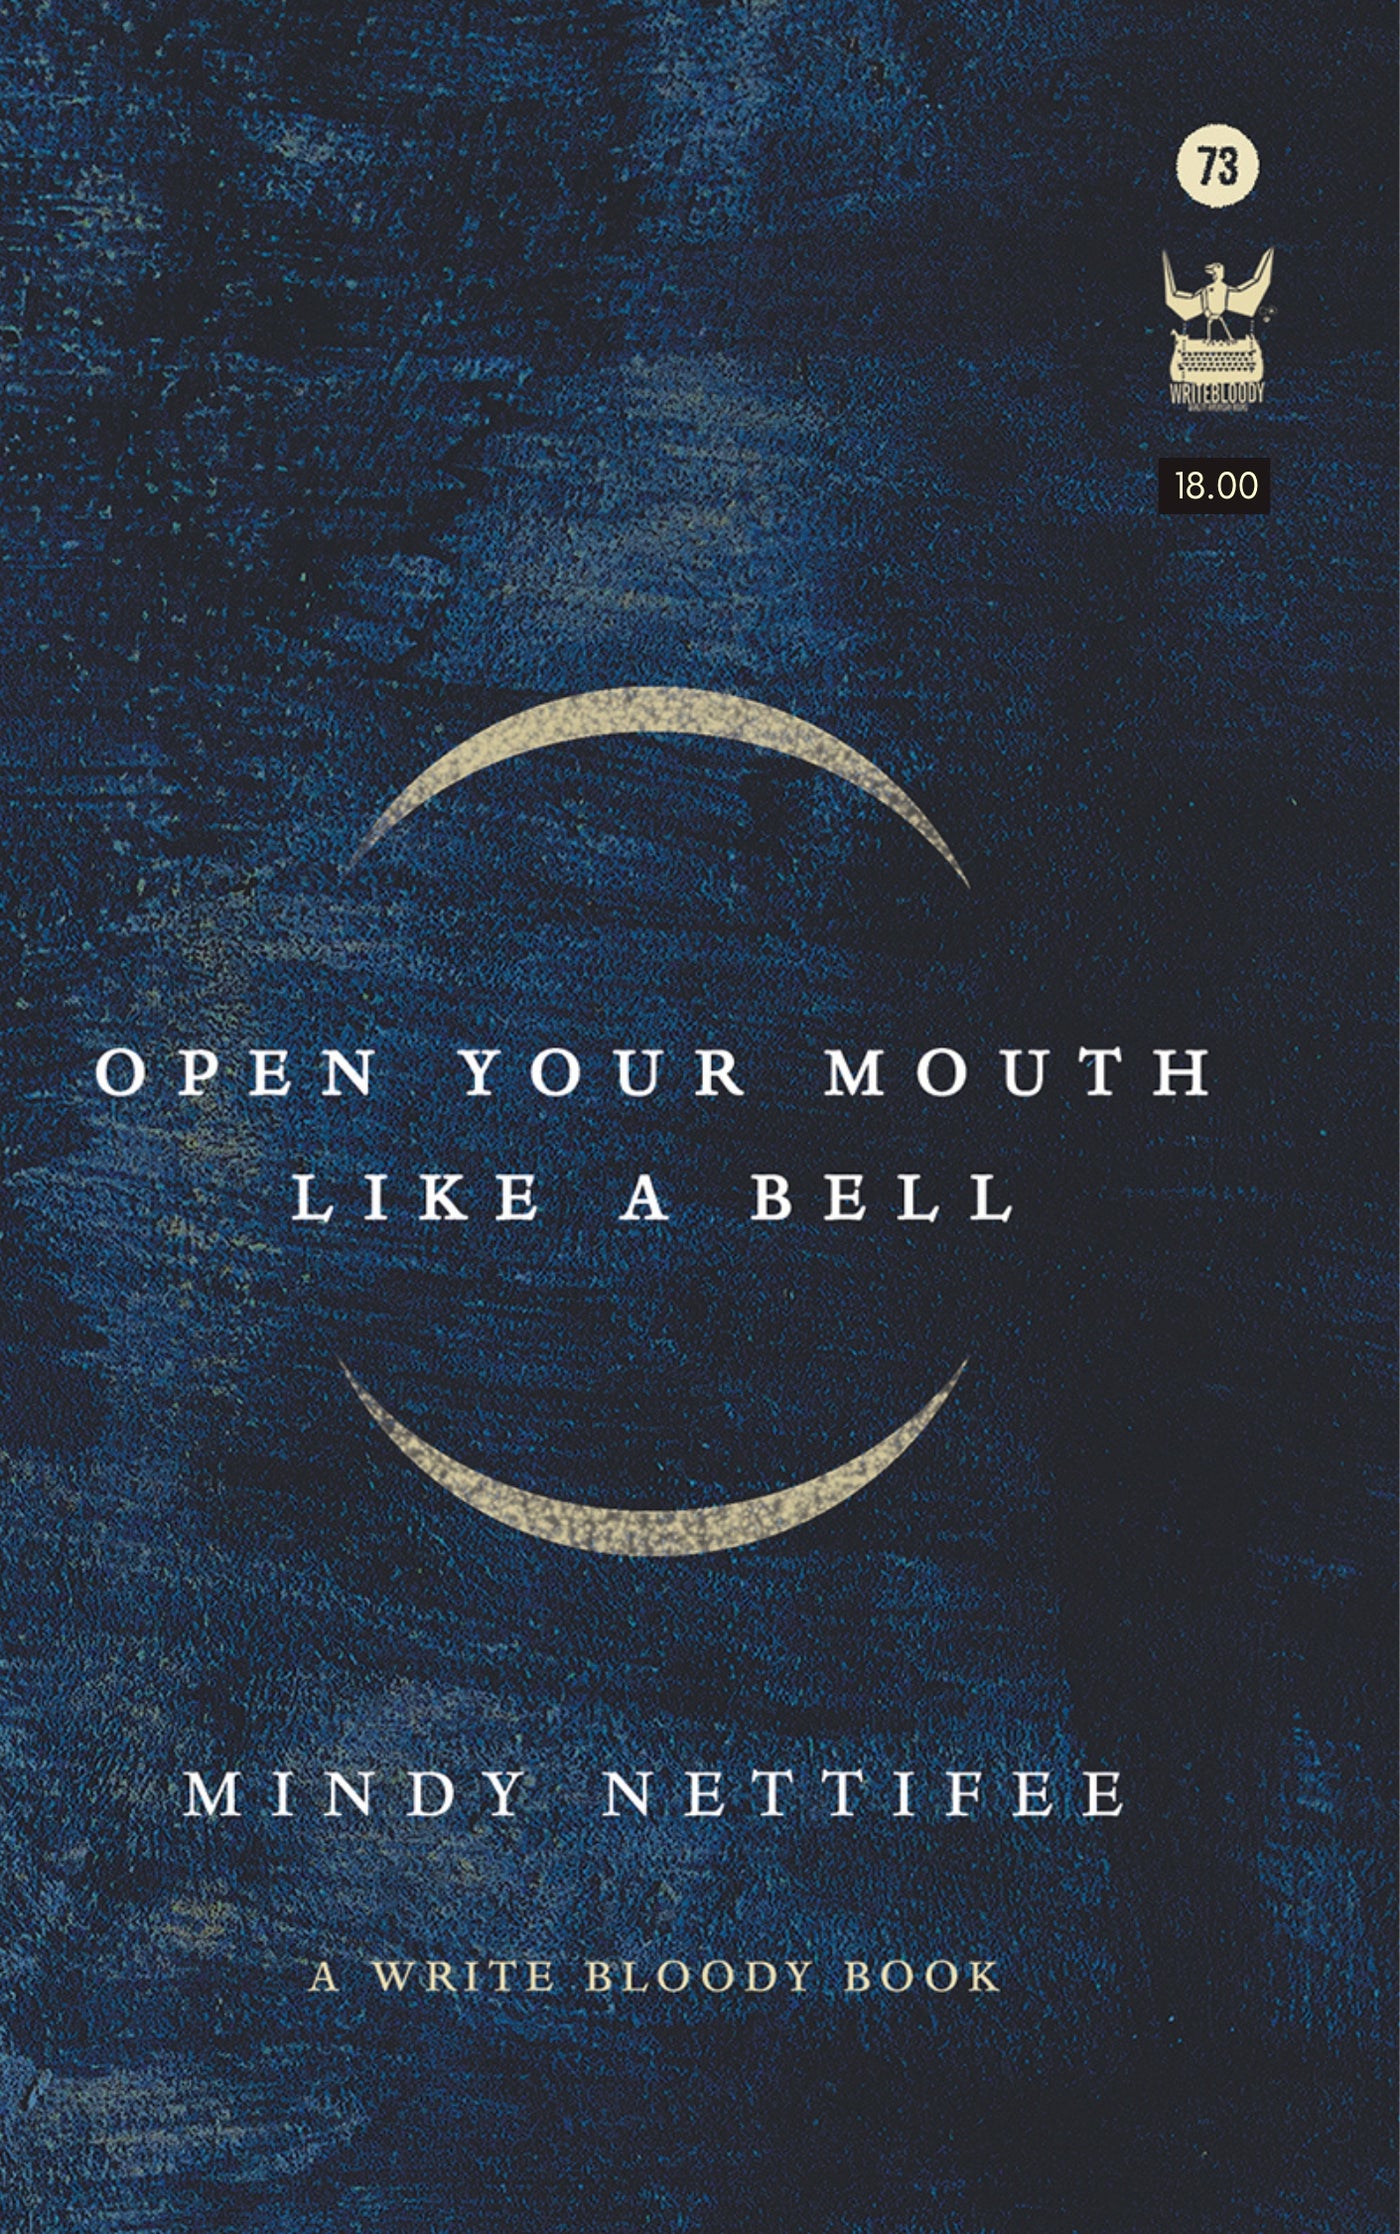 Open Your Mouth like a Bell by Mindy Nettifee